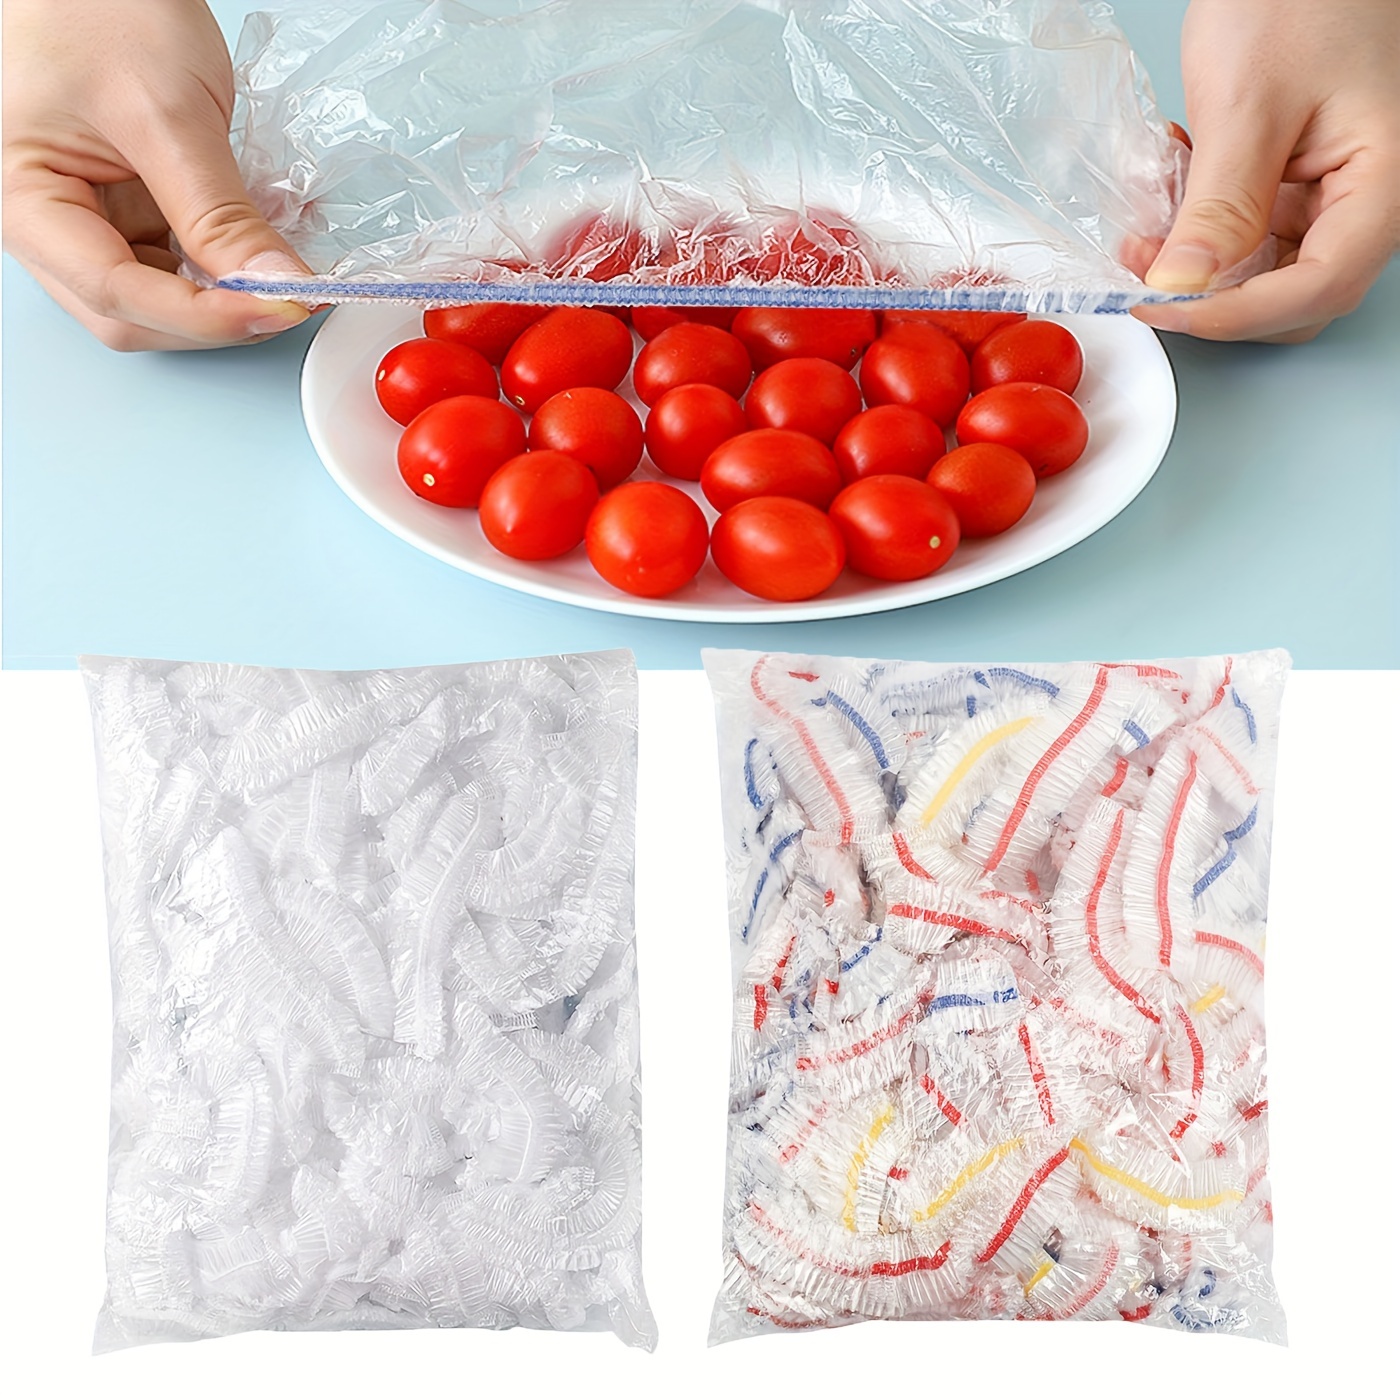 Food Storage Covers, Fresh Keeping Film, Plastic Cling Wrap, Kitchen  Leftover Seal , Transparent Elastic Freshness Protection Bags, Reusable  Universal Sealing Lids,for Bowl/plate/pot /tray, Kitchen Accessories - Temu